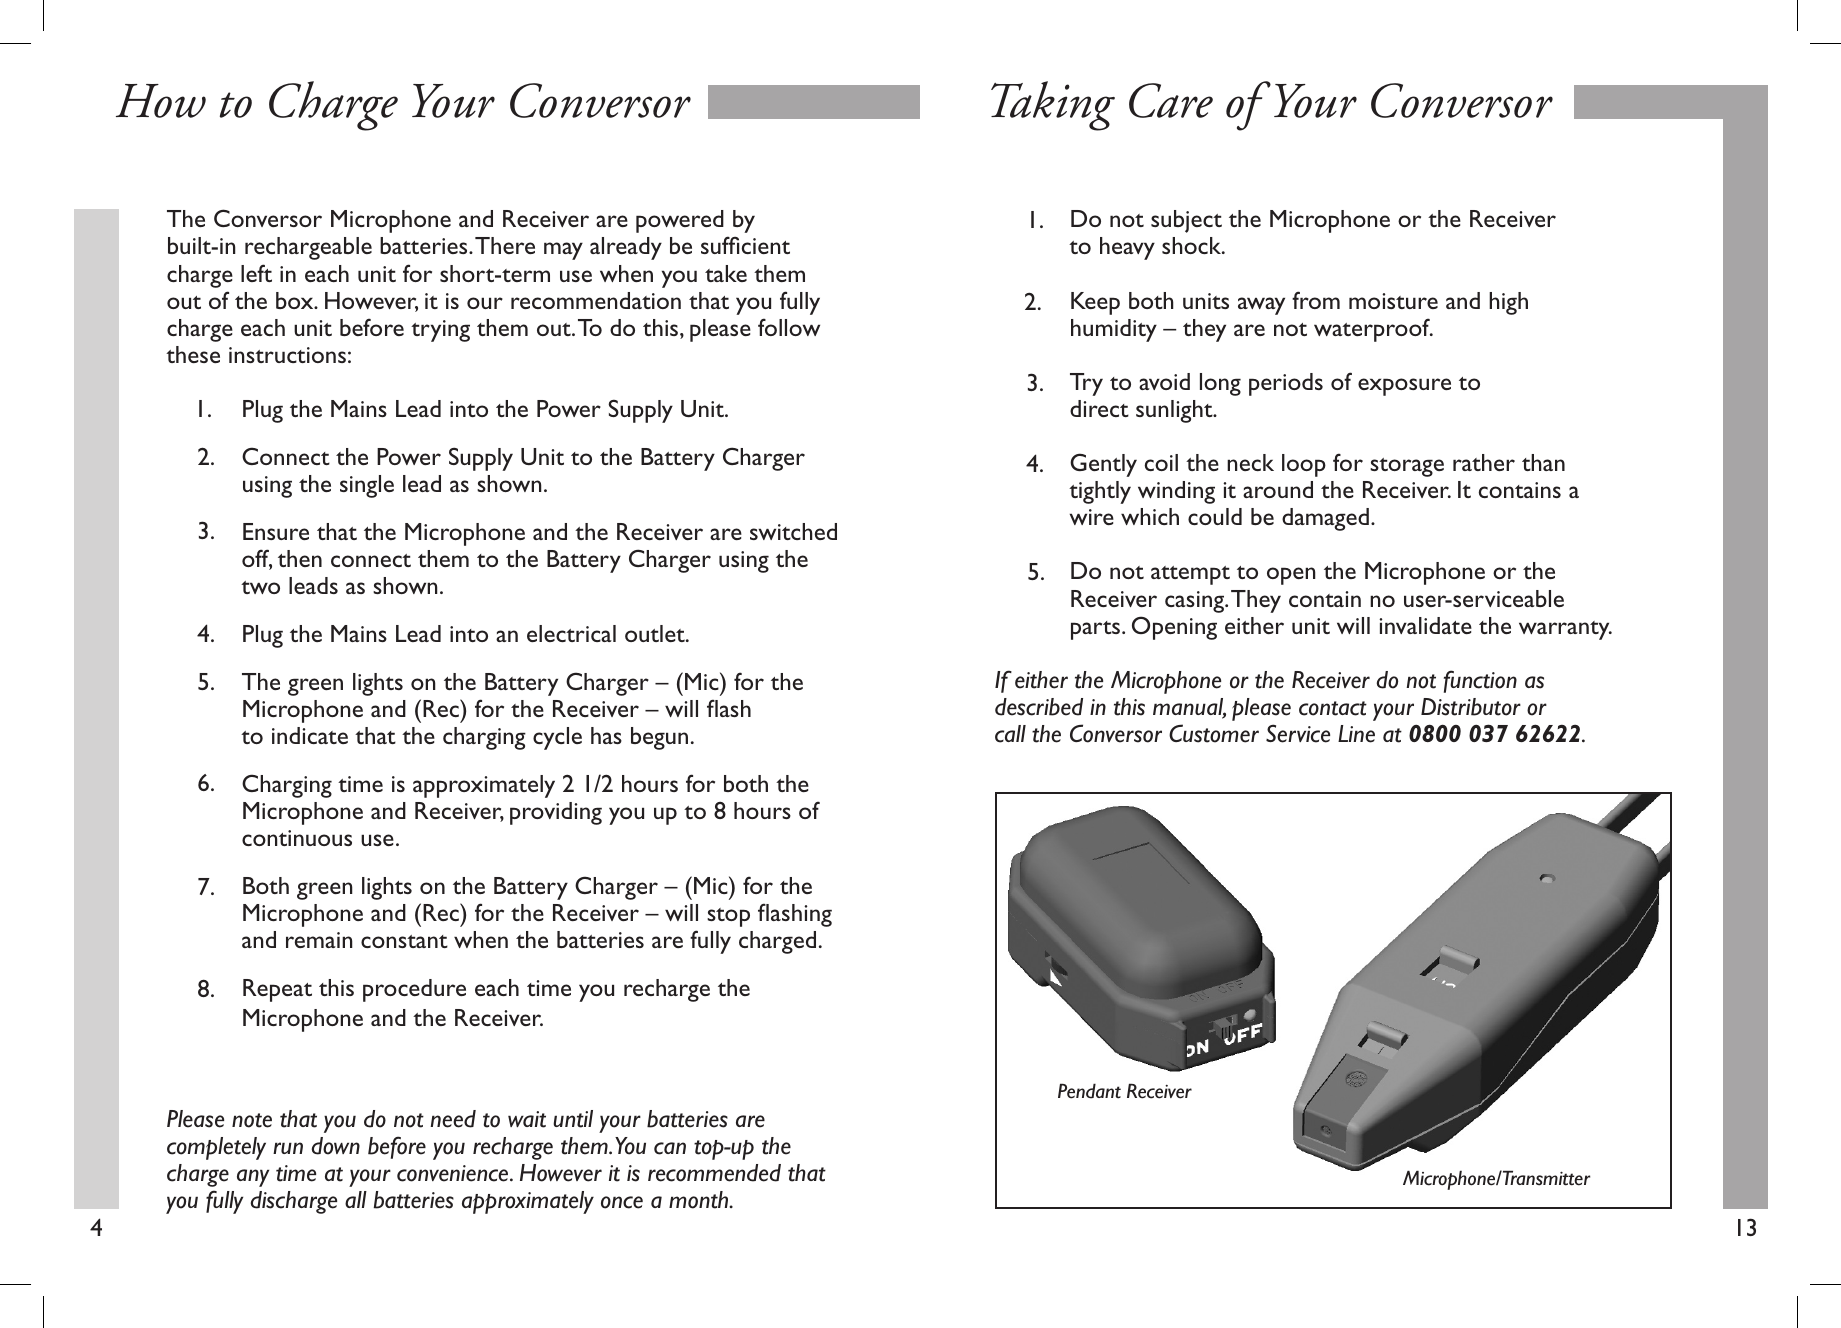 The Conversor Microphone and Receiver are powered by built-in rechargeable batteries. There may already be sufﬁcient charge left in each unit for short-term use when you take them out of the box. However, it is our recommendation that you fully charge each unit before trying them out. To do this, please follow these instructions:  Plug the Mains Lead into the Power Supply Unit.  Connect the Power Supply Unit to the Battery Charger      using the single lead as shown.  Ensure that the Microphone and the Receiver are switched    off, then connect them to the Battery Charger using the      two leads as shown.   Plug the Mains Lead into an electrical outlet.  The green lights on the Battery Charger – (Mic) for the      Microphone and (Rec) for the Receiver – will ﬂash       to indicate that the charging cycle has begun.   Charging time is approximately 2 1/2 hours for both the      Microphone and Receiver, providing you up to 8 hours of      continuous use.  Both green lights on the Battery Charger – (Mic) for the      Microphone and (Rec) for the Receiver – will stop ﬂashing    and remain constant when the batteries are fully charged.   Repeat this procedure each time you recharge the   Microphone and the Receiver. Please note that you do not need to wait until your batteries are completely run down before you recharge them. You can top-up the charge any time at your convenience. However it is recommended that you fully discharge all batteries approximately once a month.413How to Charge Your Conversor Taking Care of Your Conversor8.7.6.5.4.3.2.1.  Do not subject the Microphone or the Receiver   to heavy shock.   Keep both units away from moisture and high   humidity – they are not waterproof.  Try to avoid long periods of exposure to   direct sunlight.   Gently coil the neck loop for storage rather than      tightly winding it around the Receiver. It contains a     wire which could be damaged.   Do not attempt to open the Microphone or the   Receiver casing. They contain no user-serviceable      parts. Opening either unit will invalidate the warranty.If either the Microphone or the Receiver do not function as described in this manual, please contact your Distributor or call the Conversor Customer Service Line at 0800 037 62622.5.4.3.2.1.Microphone/TransmitterPendant Receiver